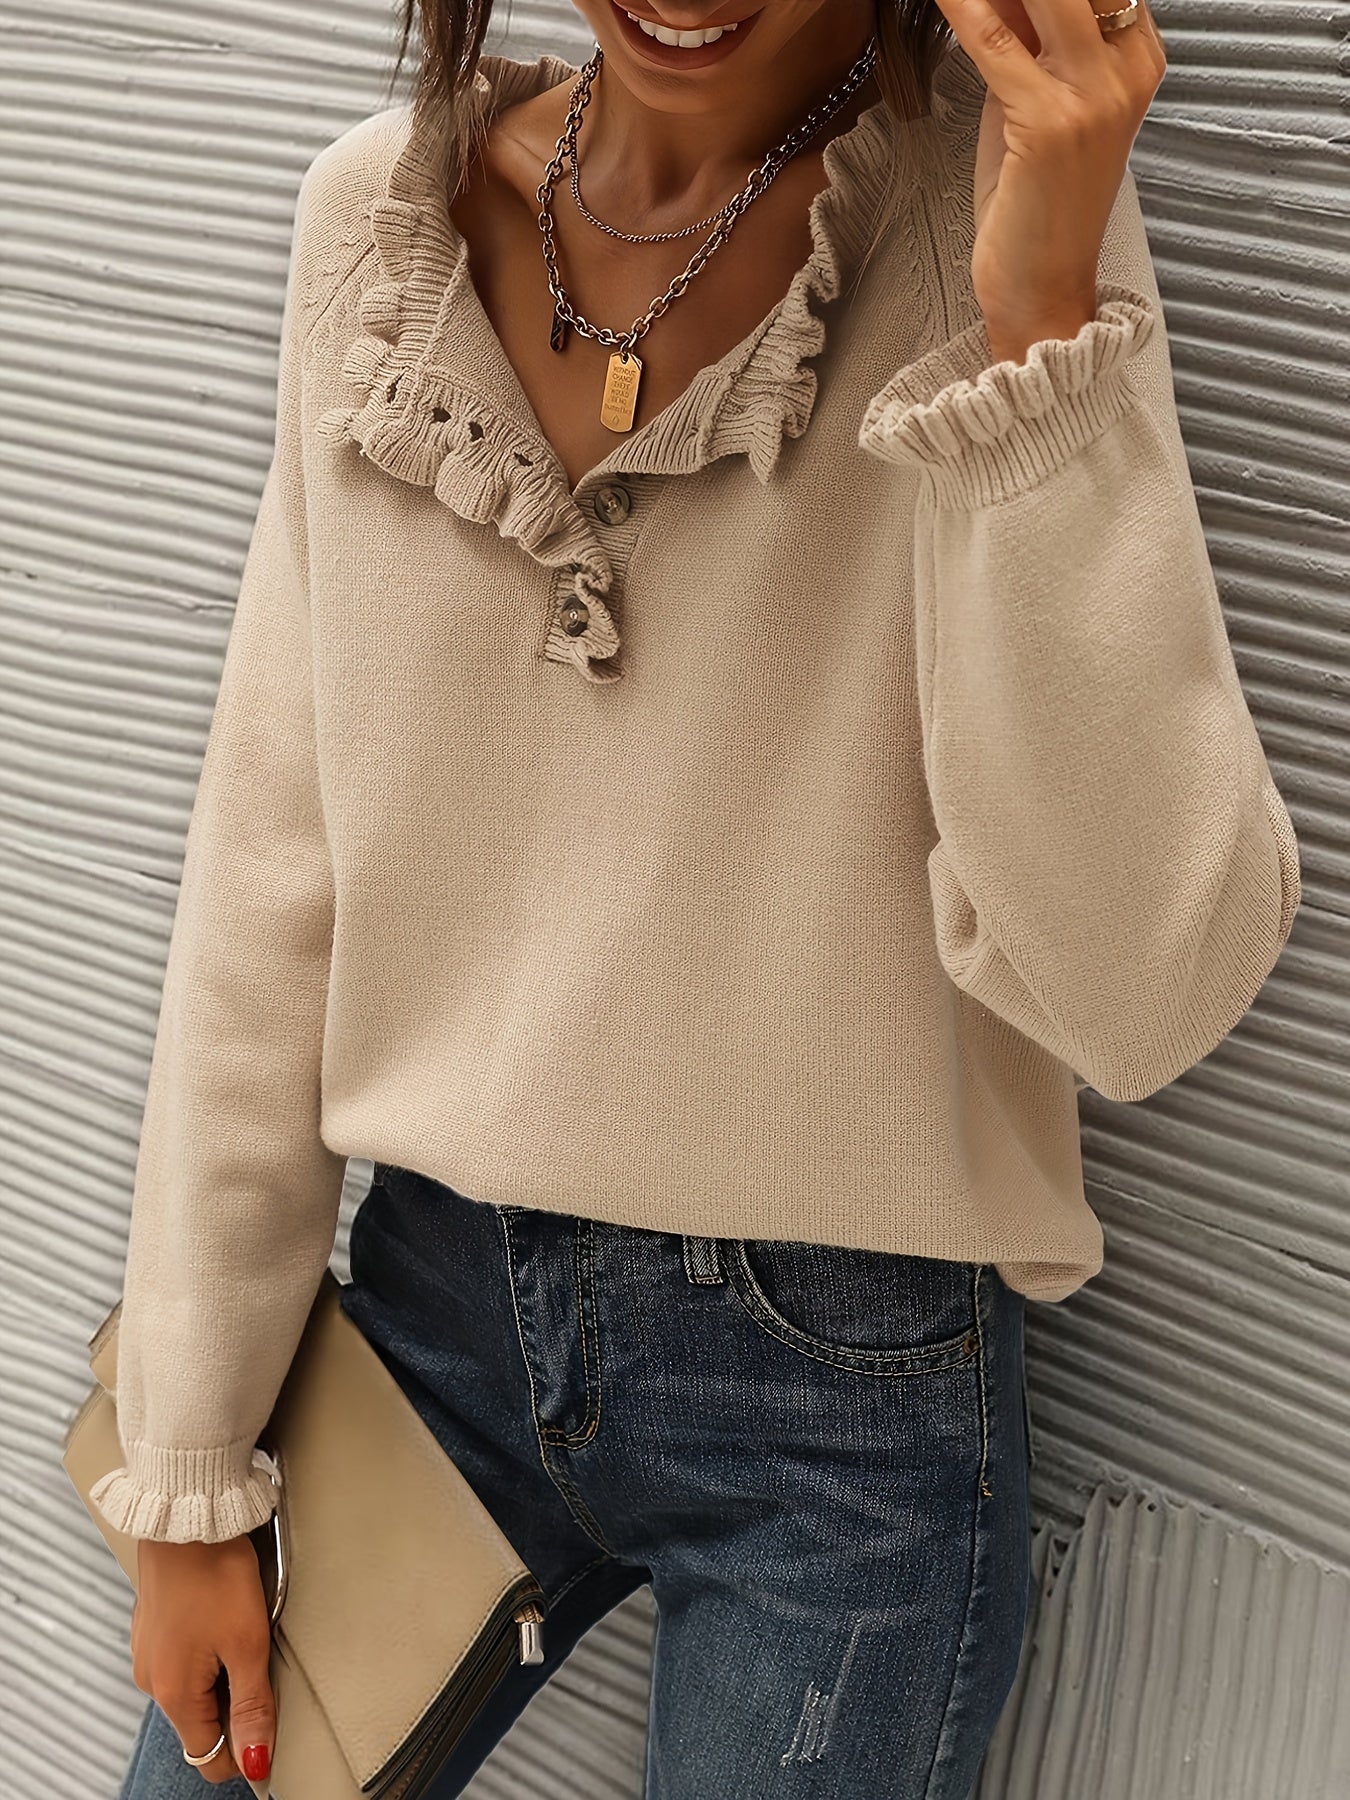 vlovelaw Solid V Neck Button Ruffle Hem Pullover Sweater, Casual Long Sleeve Sweater For Fall & Winter, Women's Clothing